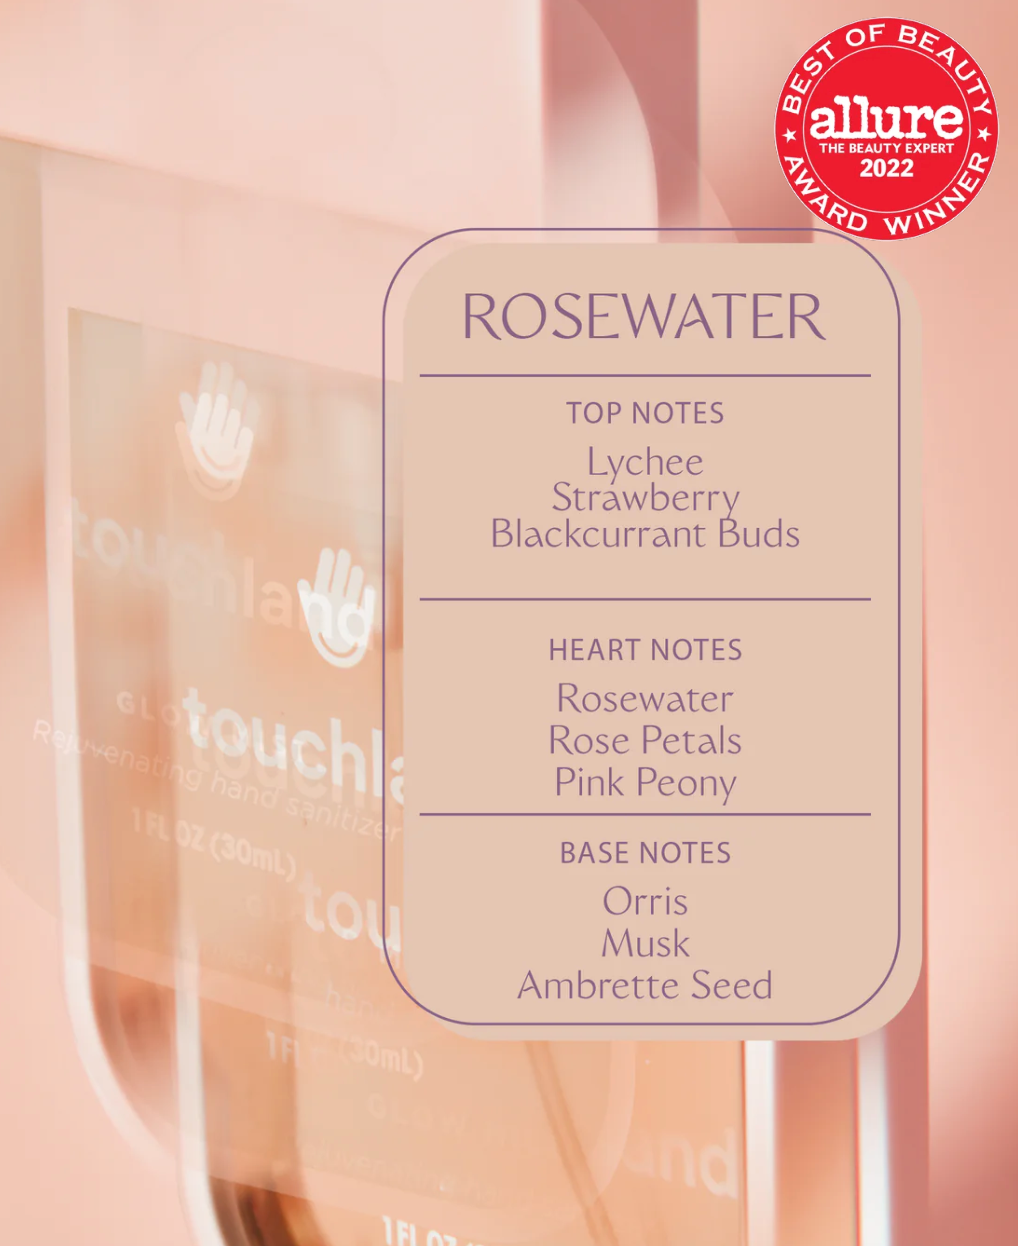 touchland glow mist - rosewater